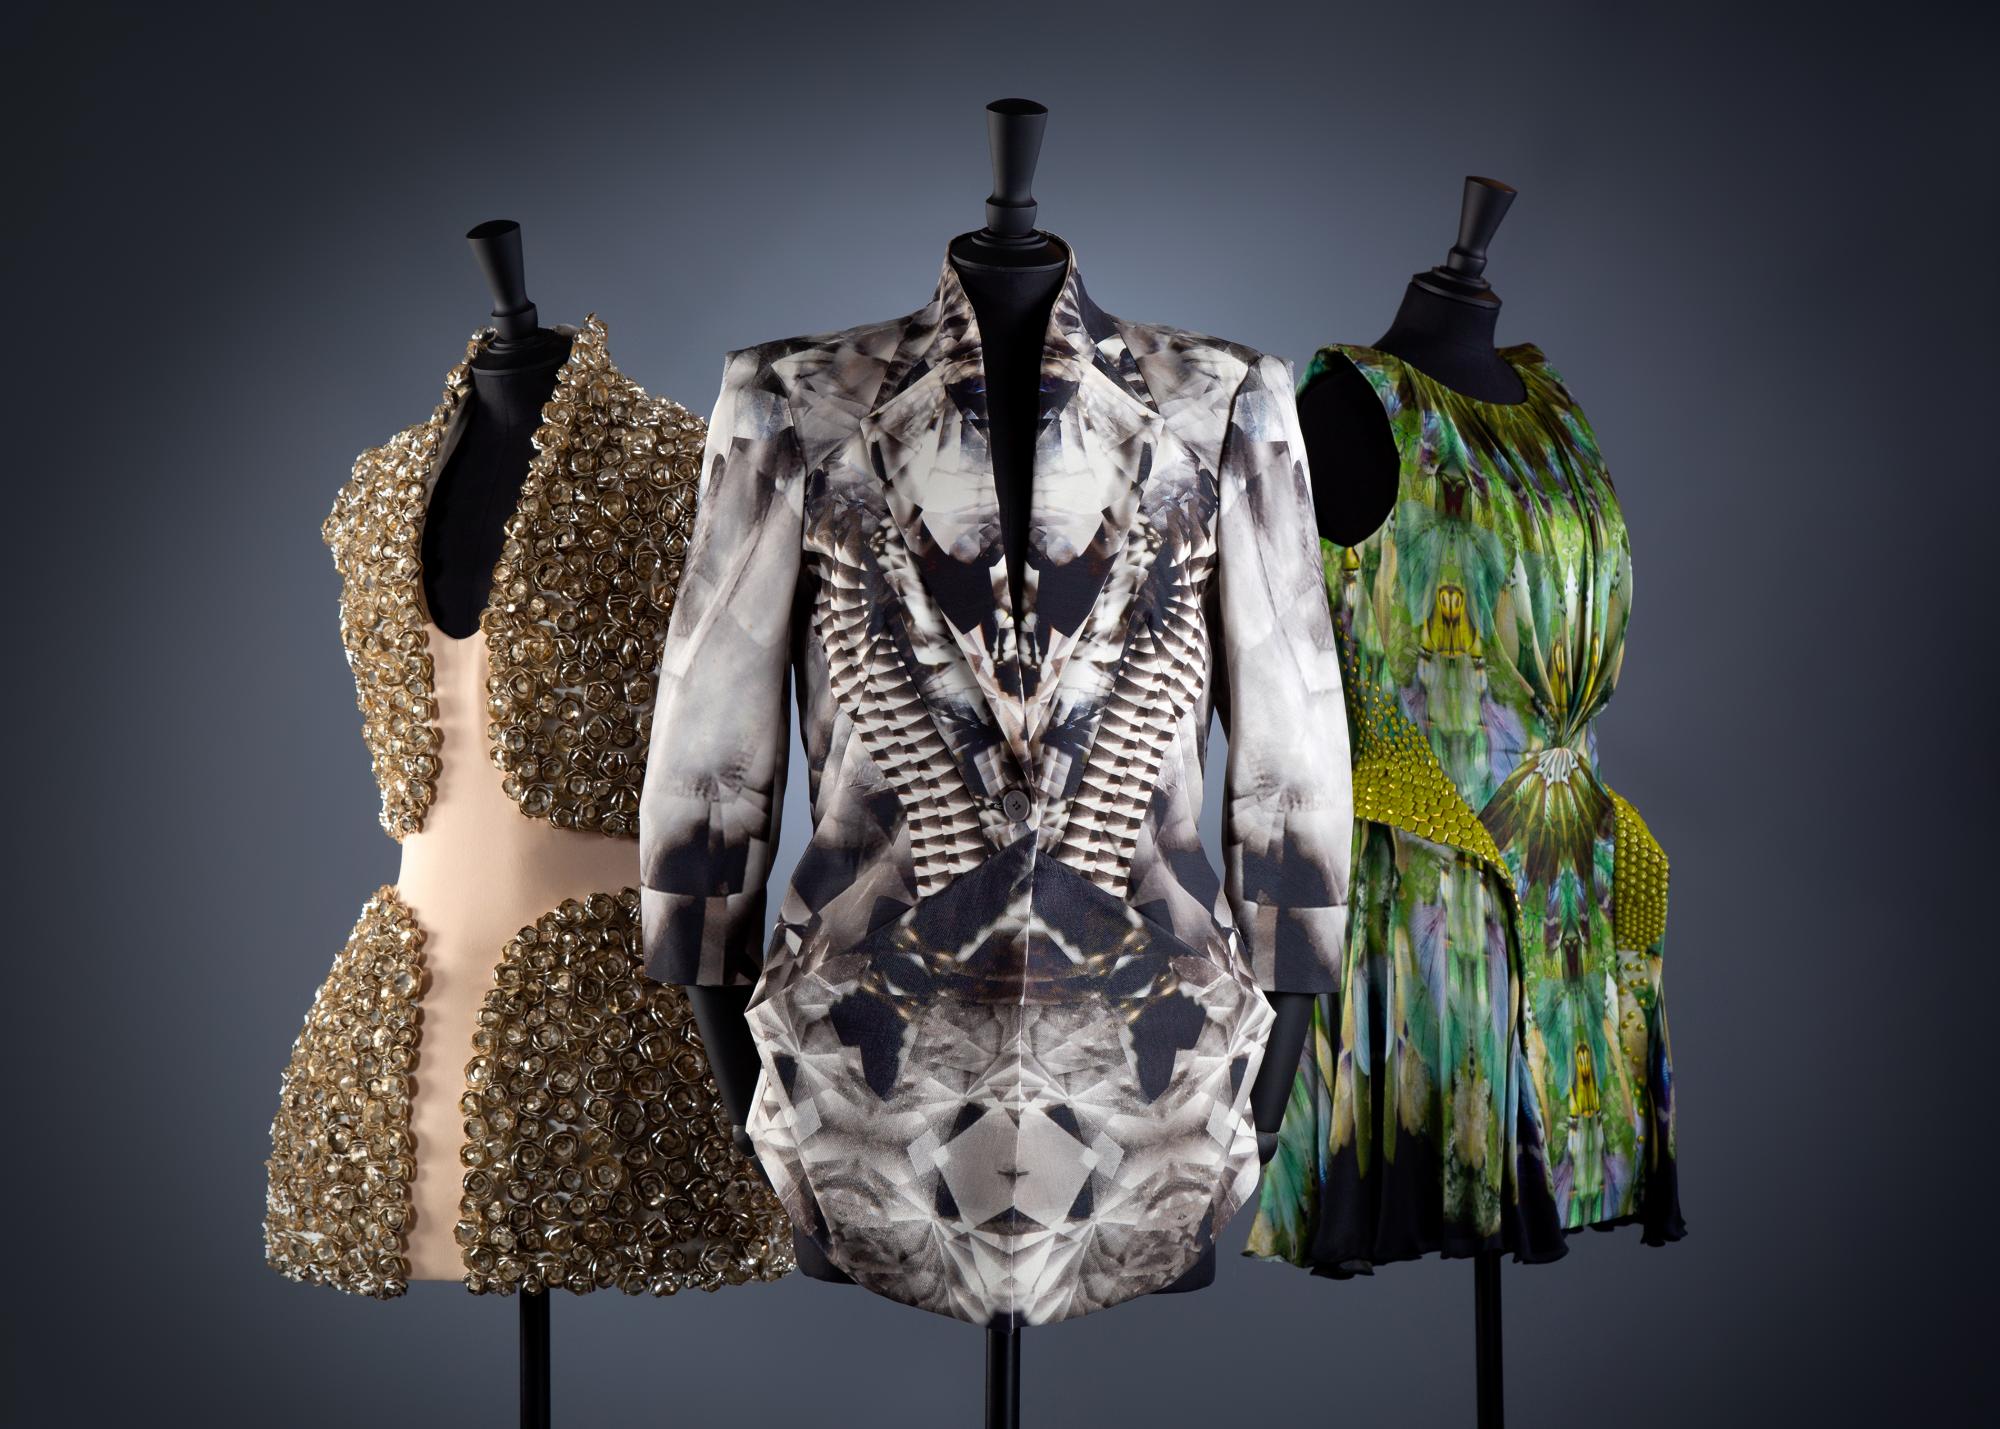 Rare early designs by Lee Alexander McQueen go up for auction